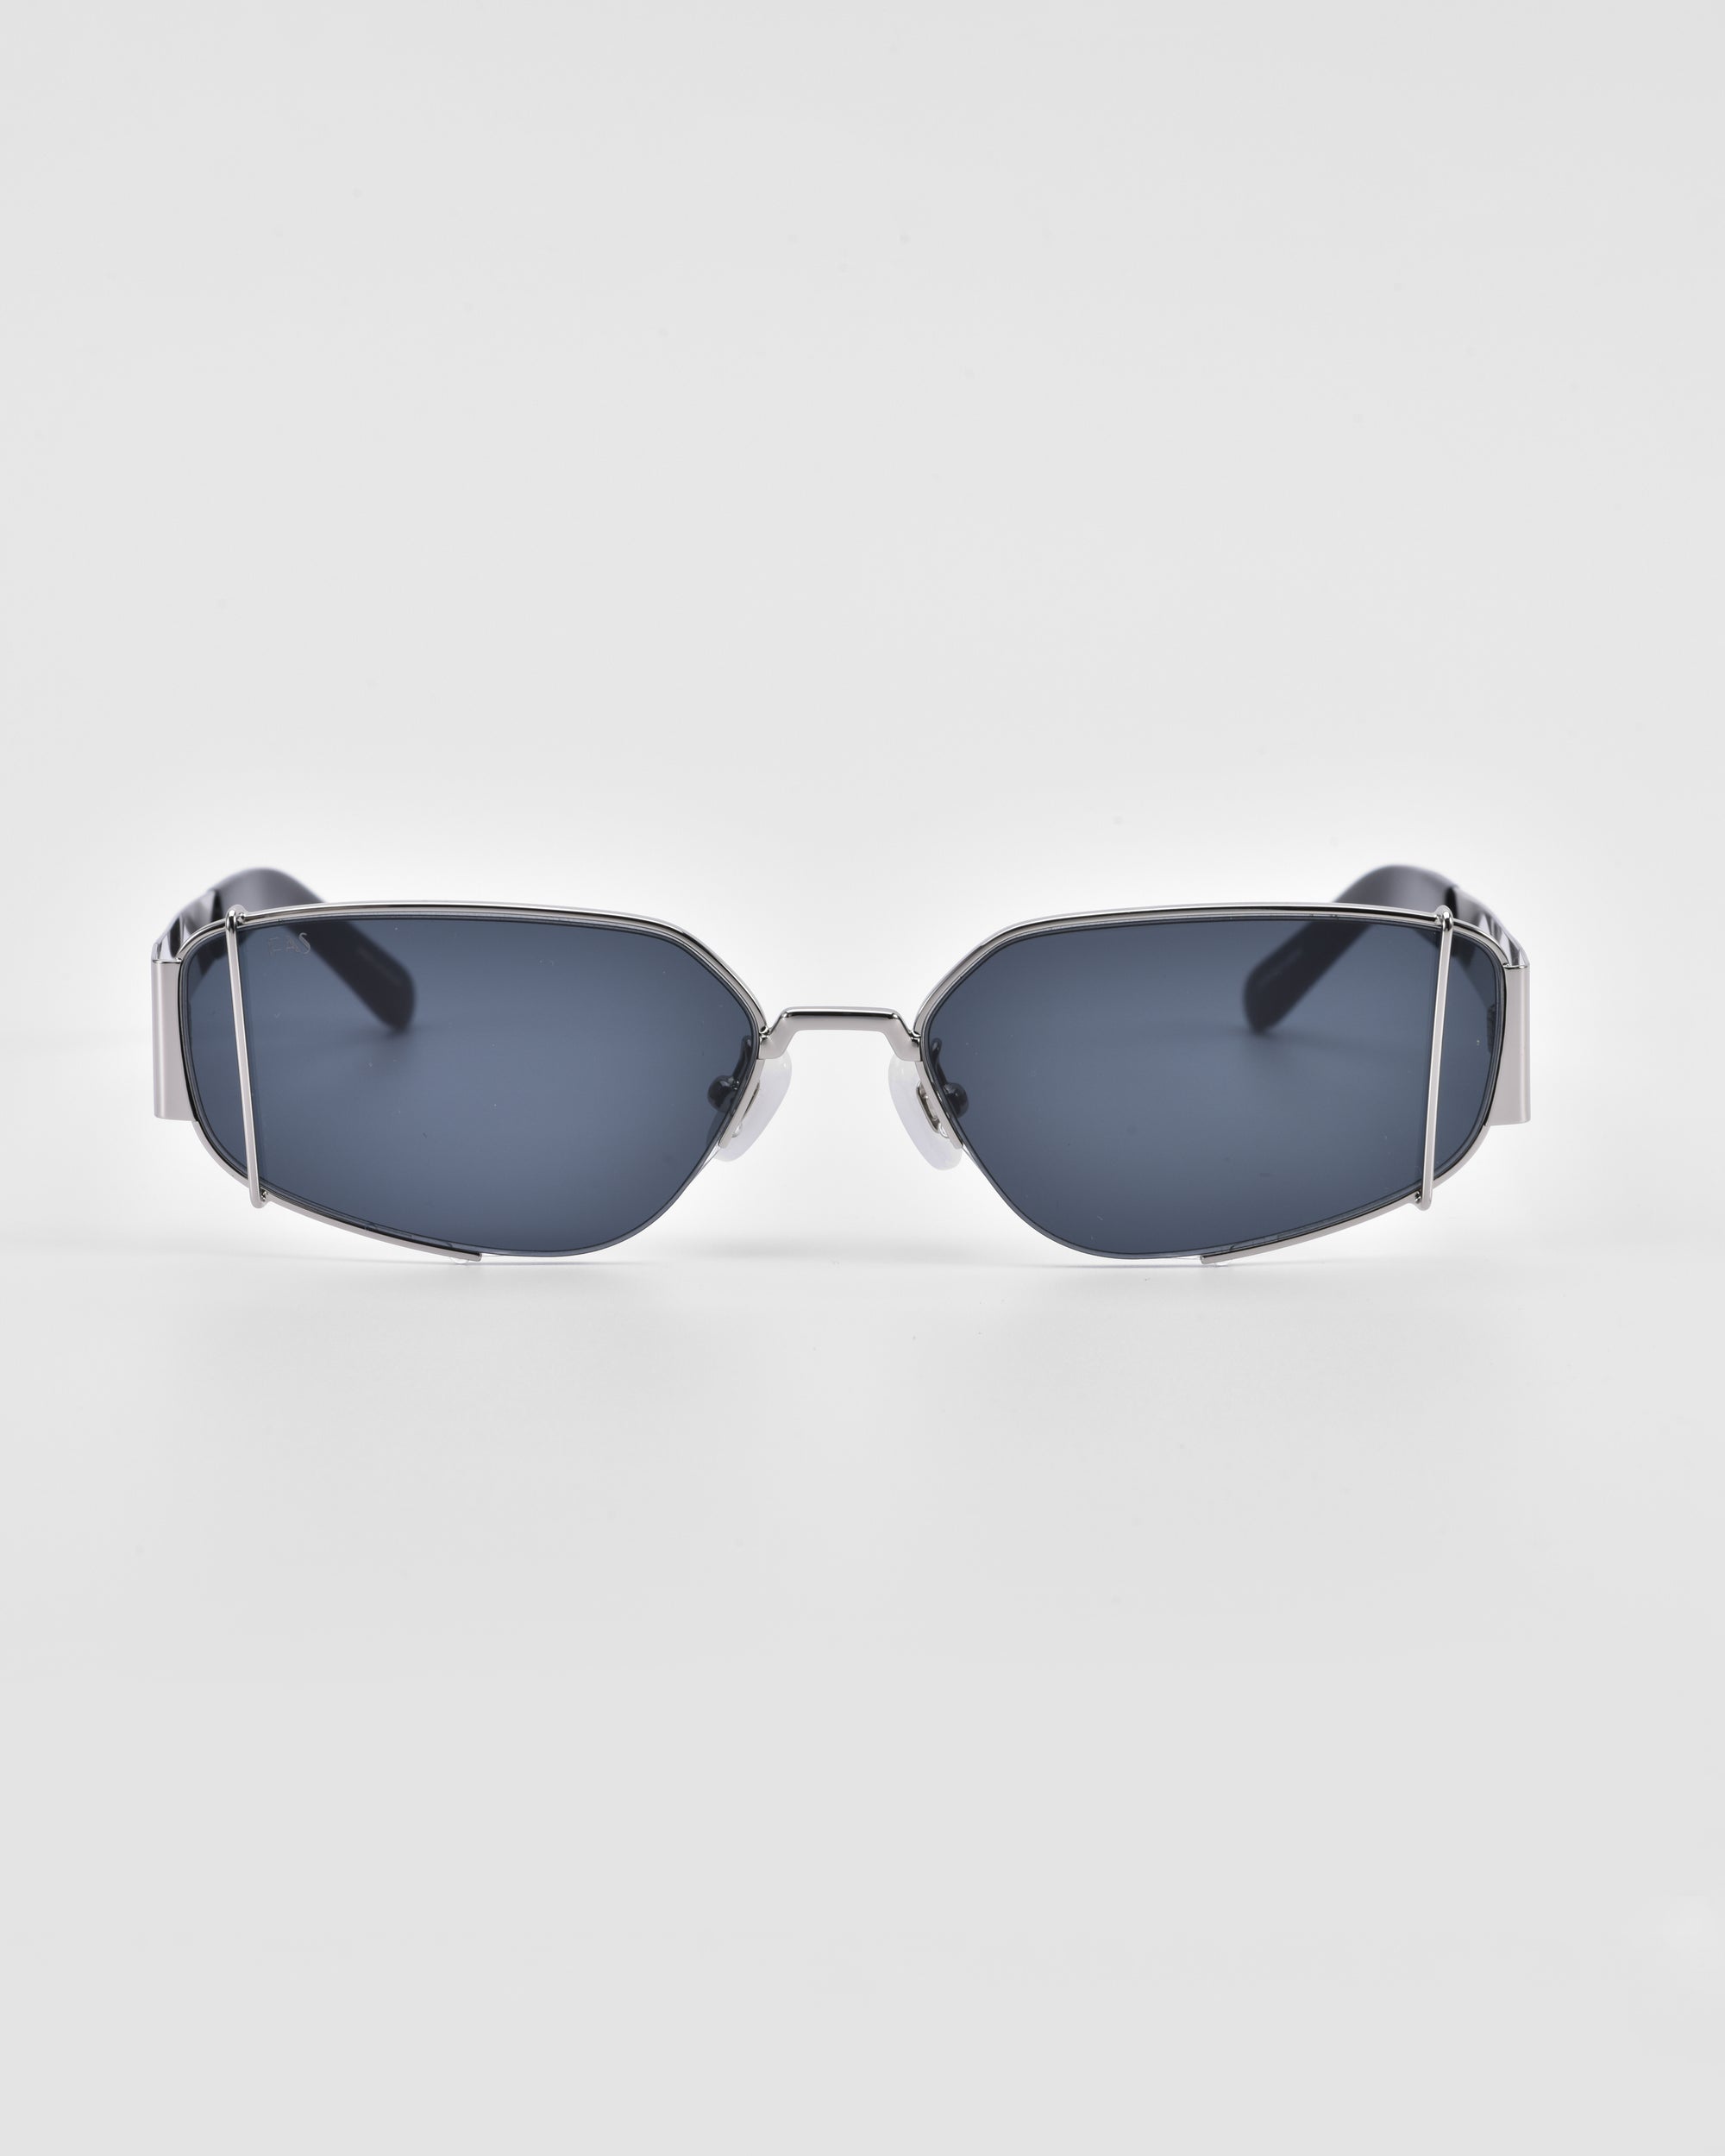 A pair of sleek, modern Talia sunglasses by For Art's Sake® with rectangular, dark-tinted lenses and thin 18-karat gold frames with an angular design, set against a plain white background.